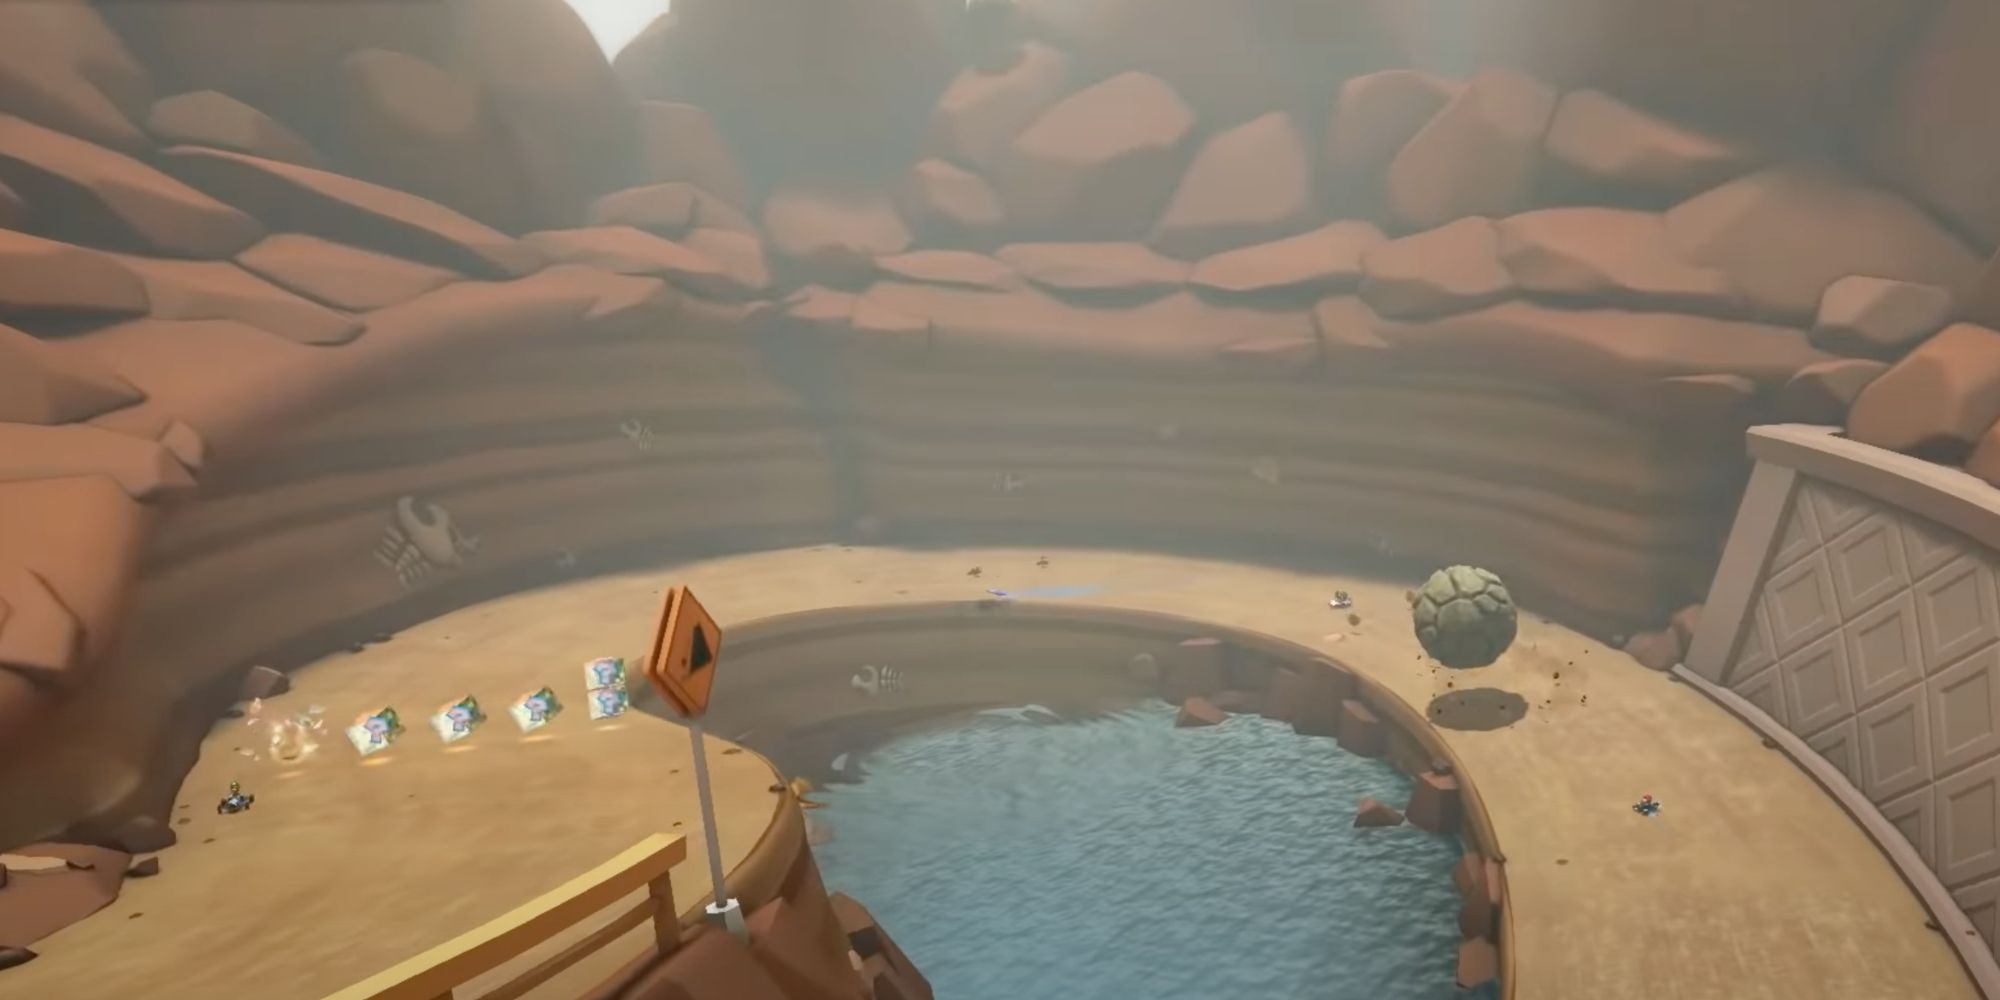 Mario Kart 8 Booster Course Pass brings back a classic track from MK64, Choco Mountain, with some disappointing changes